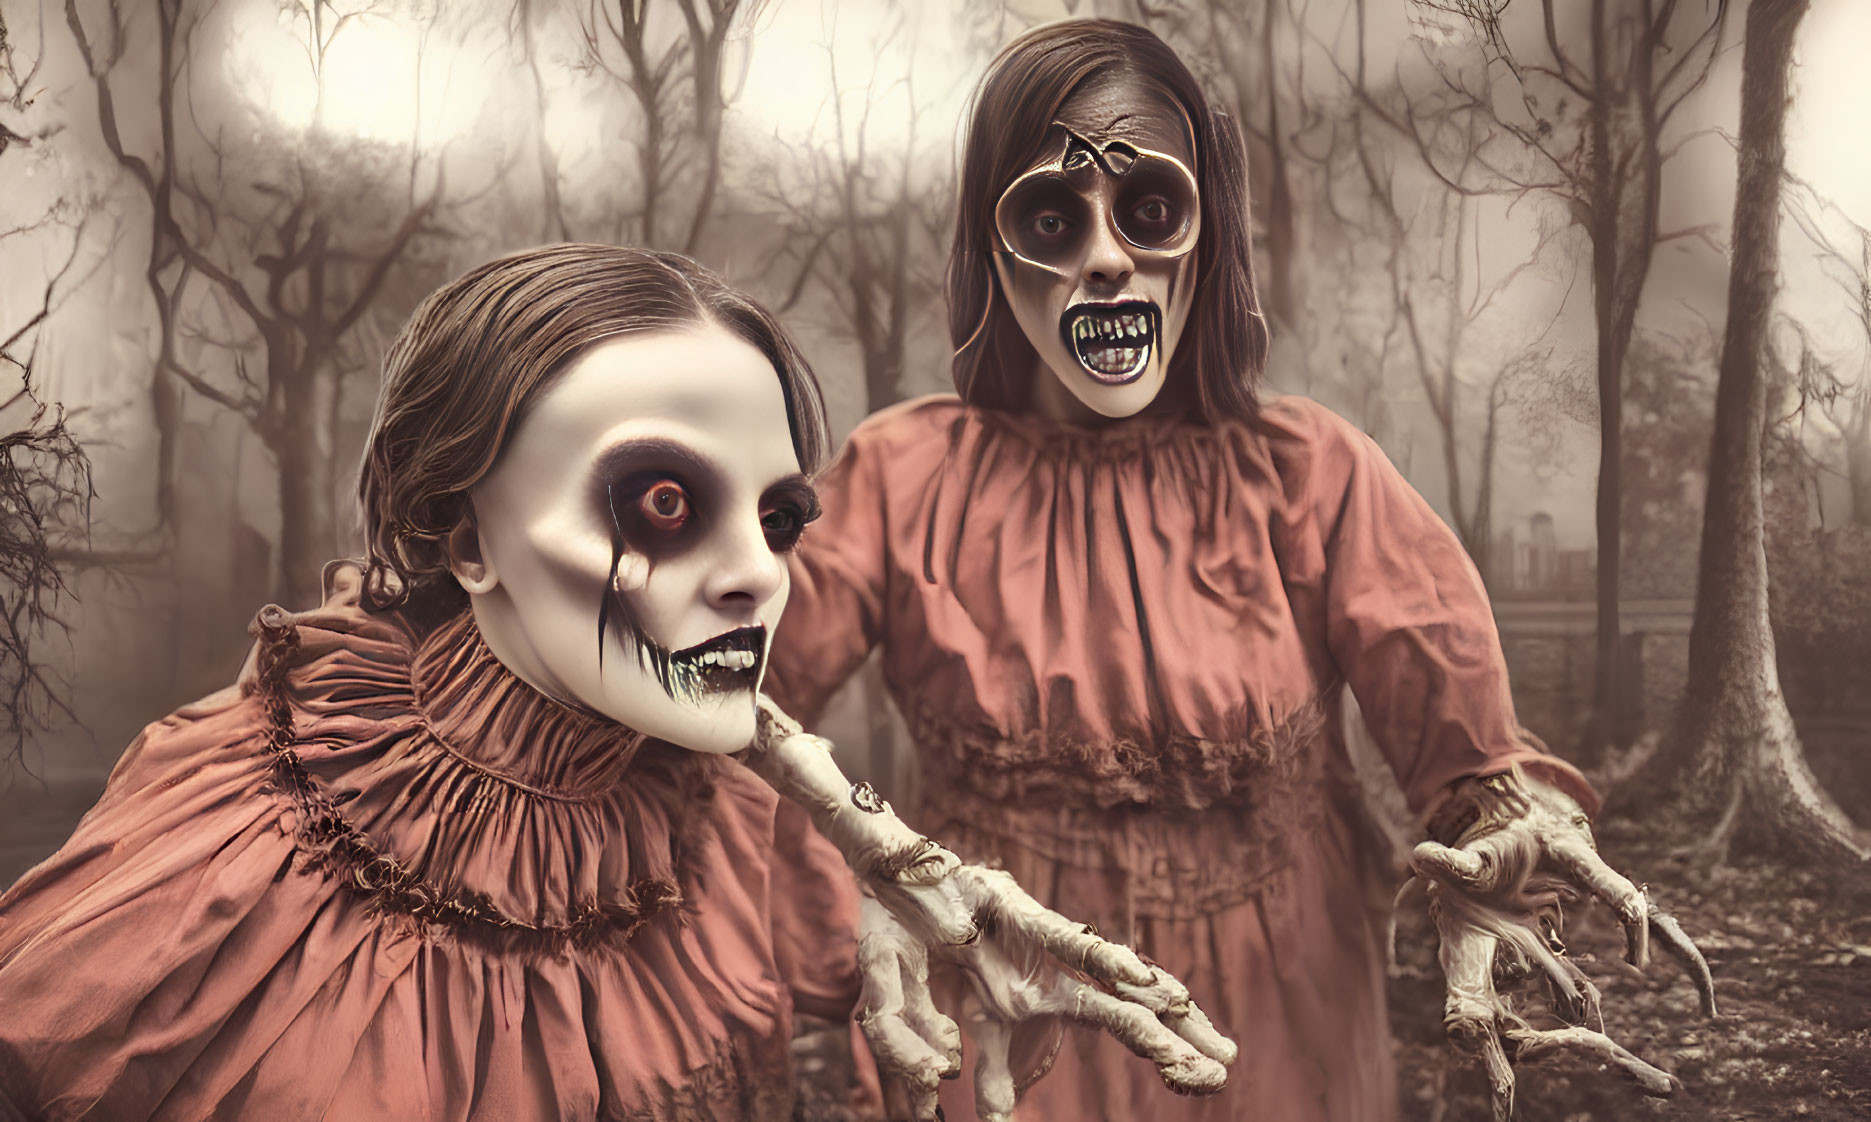 Two eerie clown costumes with skeletal makeup in foggy forest.